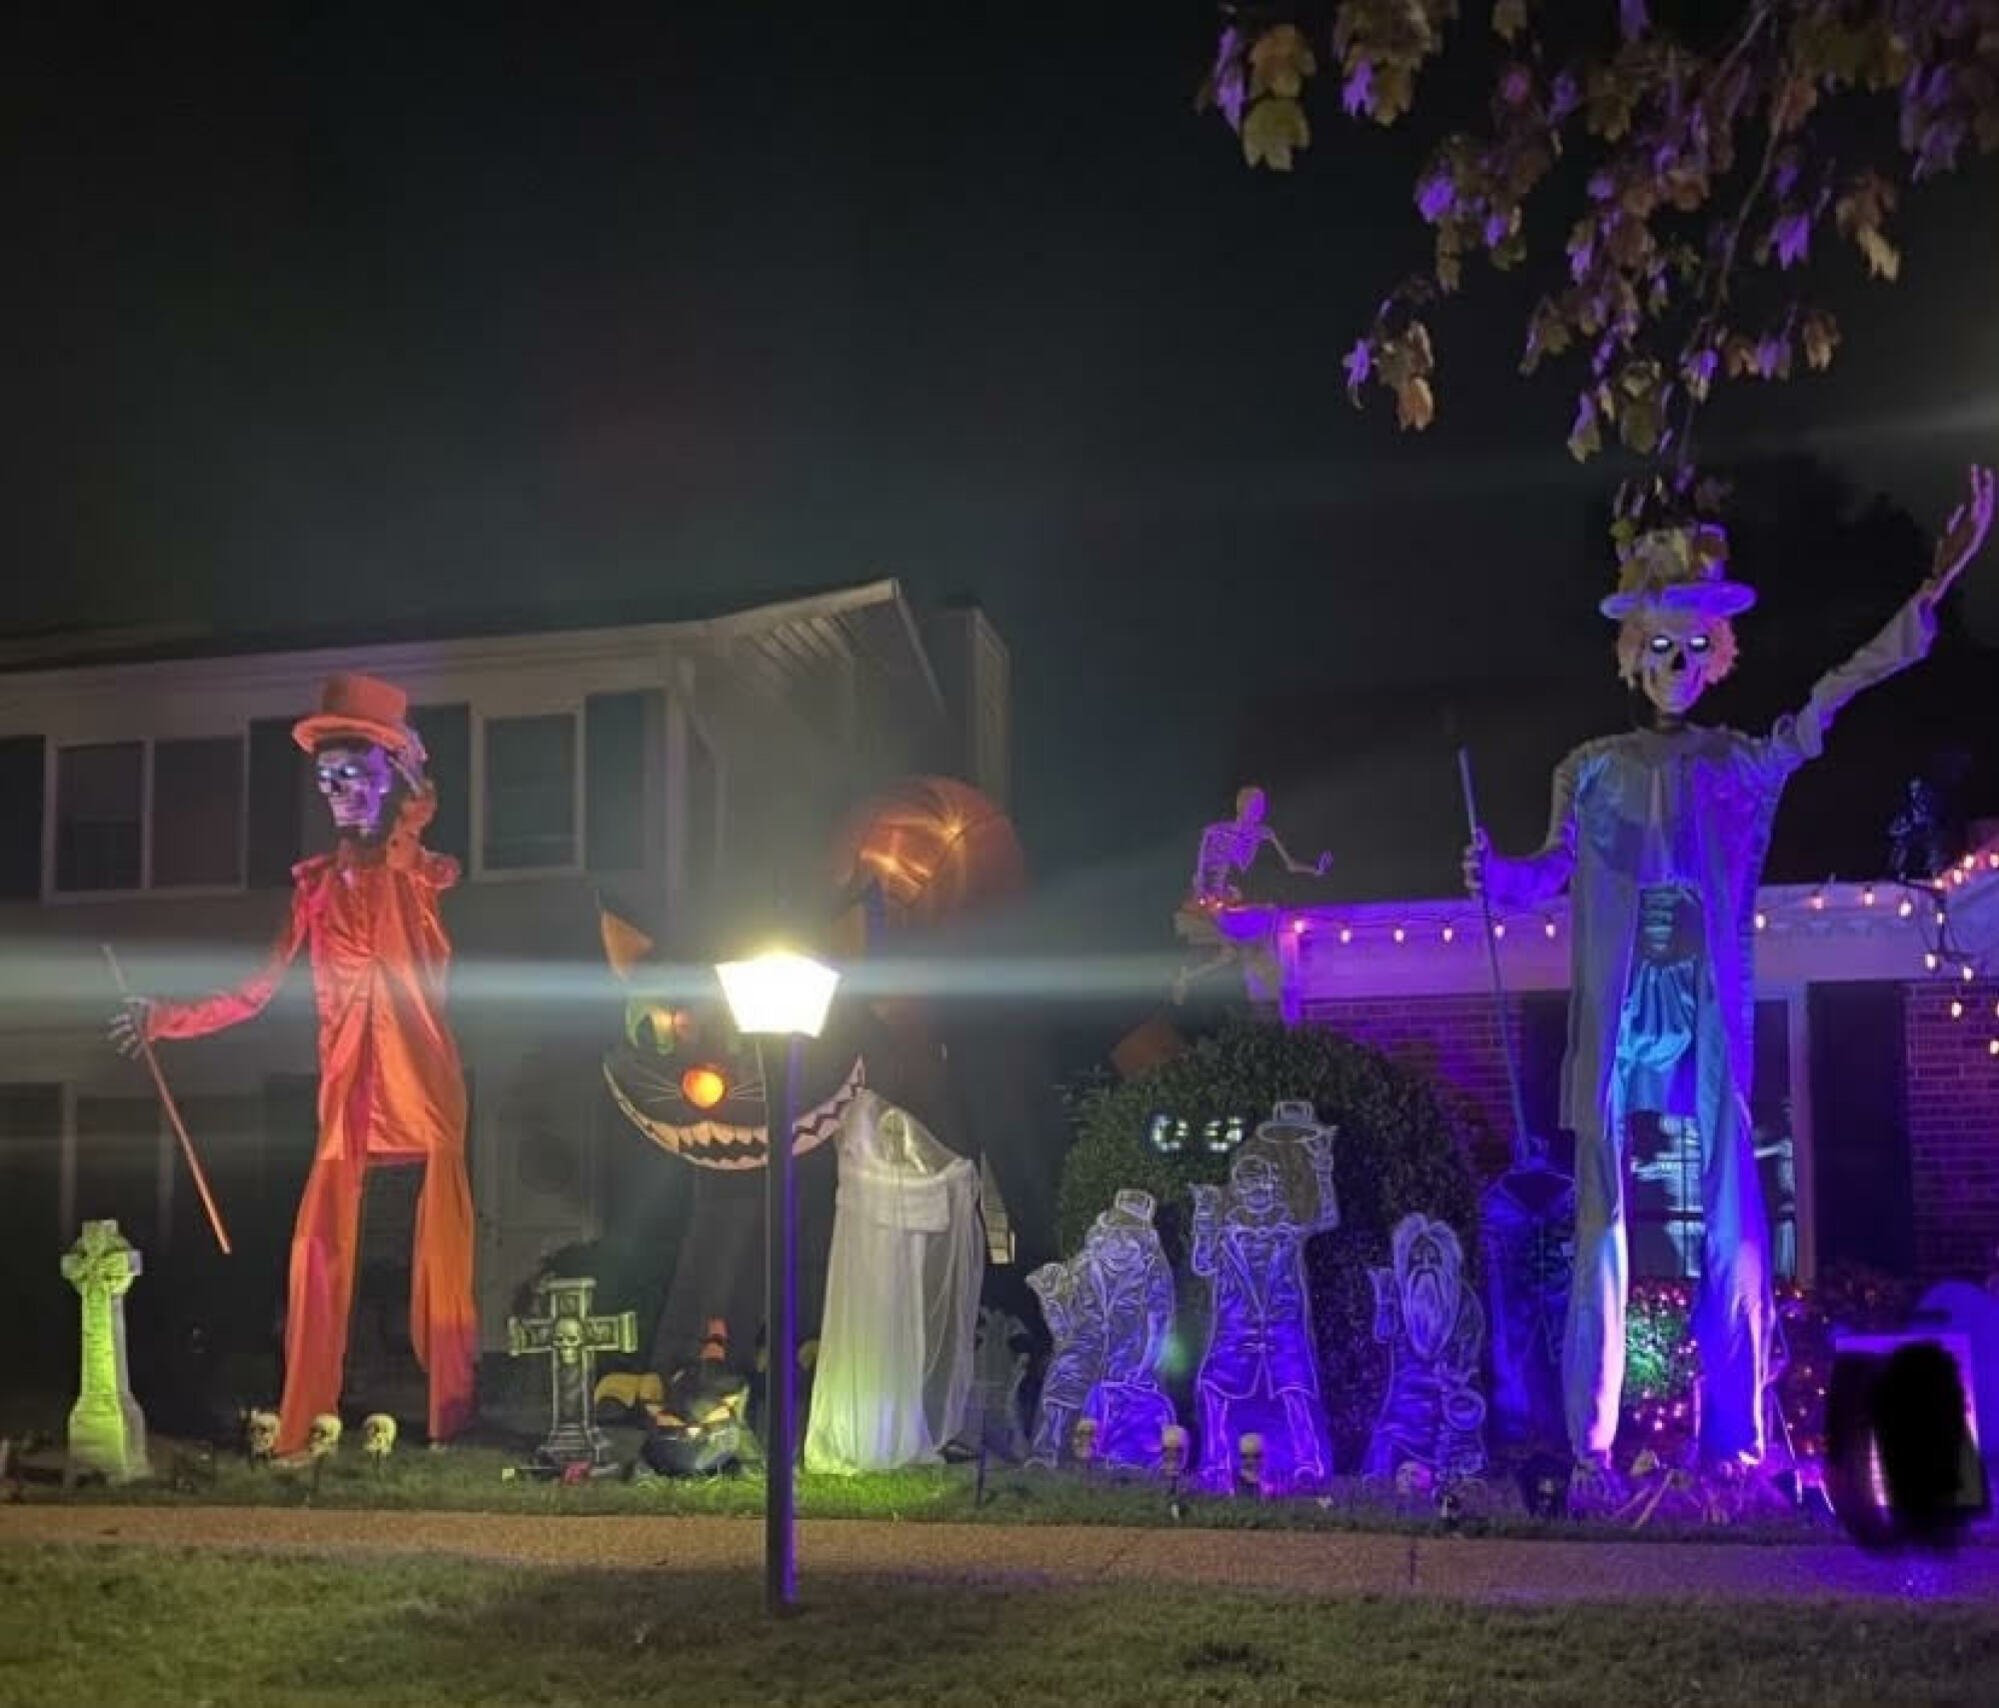 two home depot skeletons dressed in "dumb and dumber" tuxedos in a dark yard